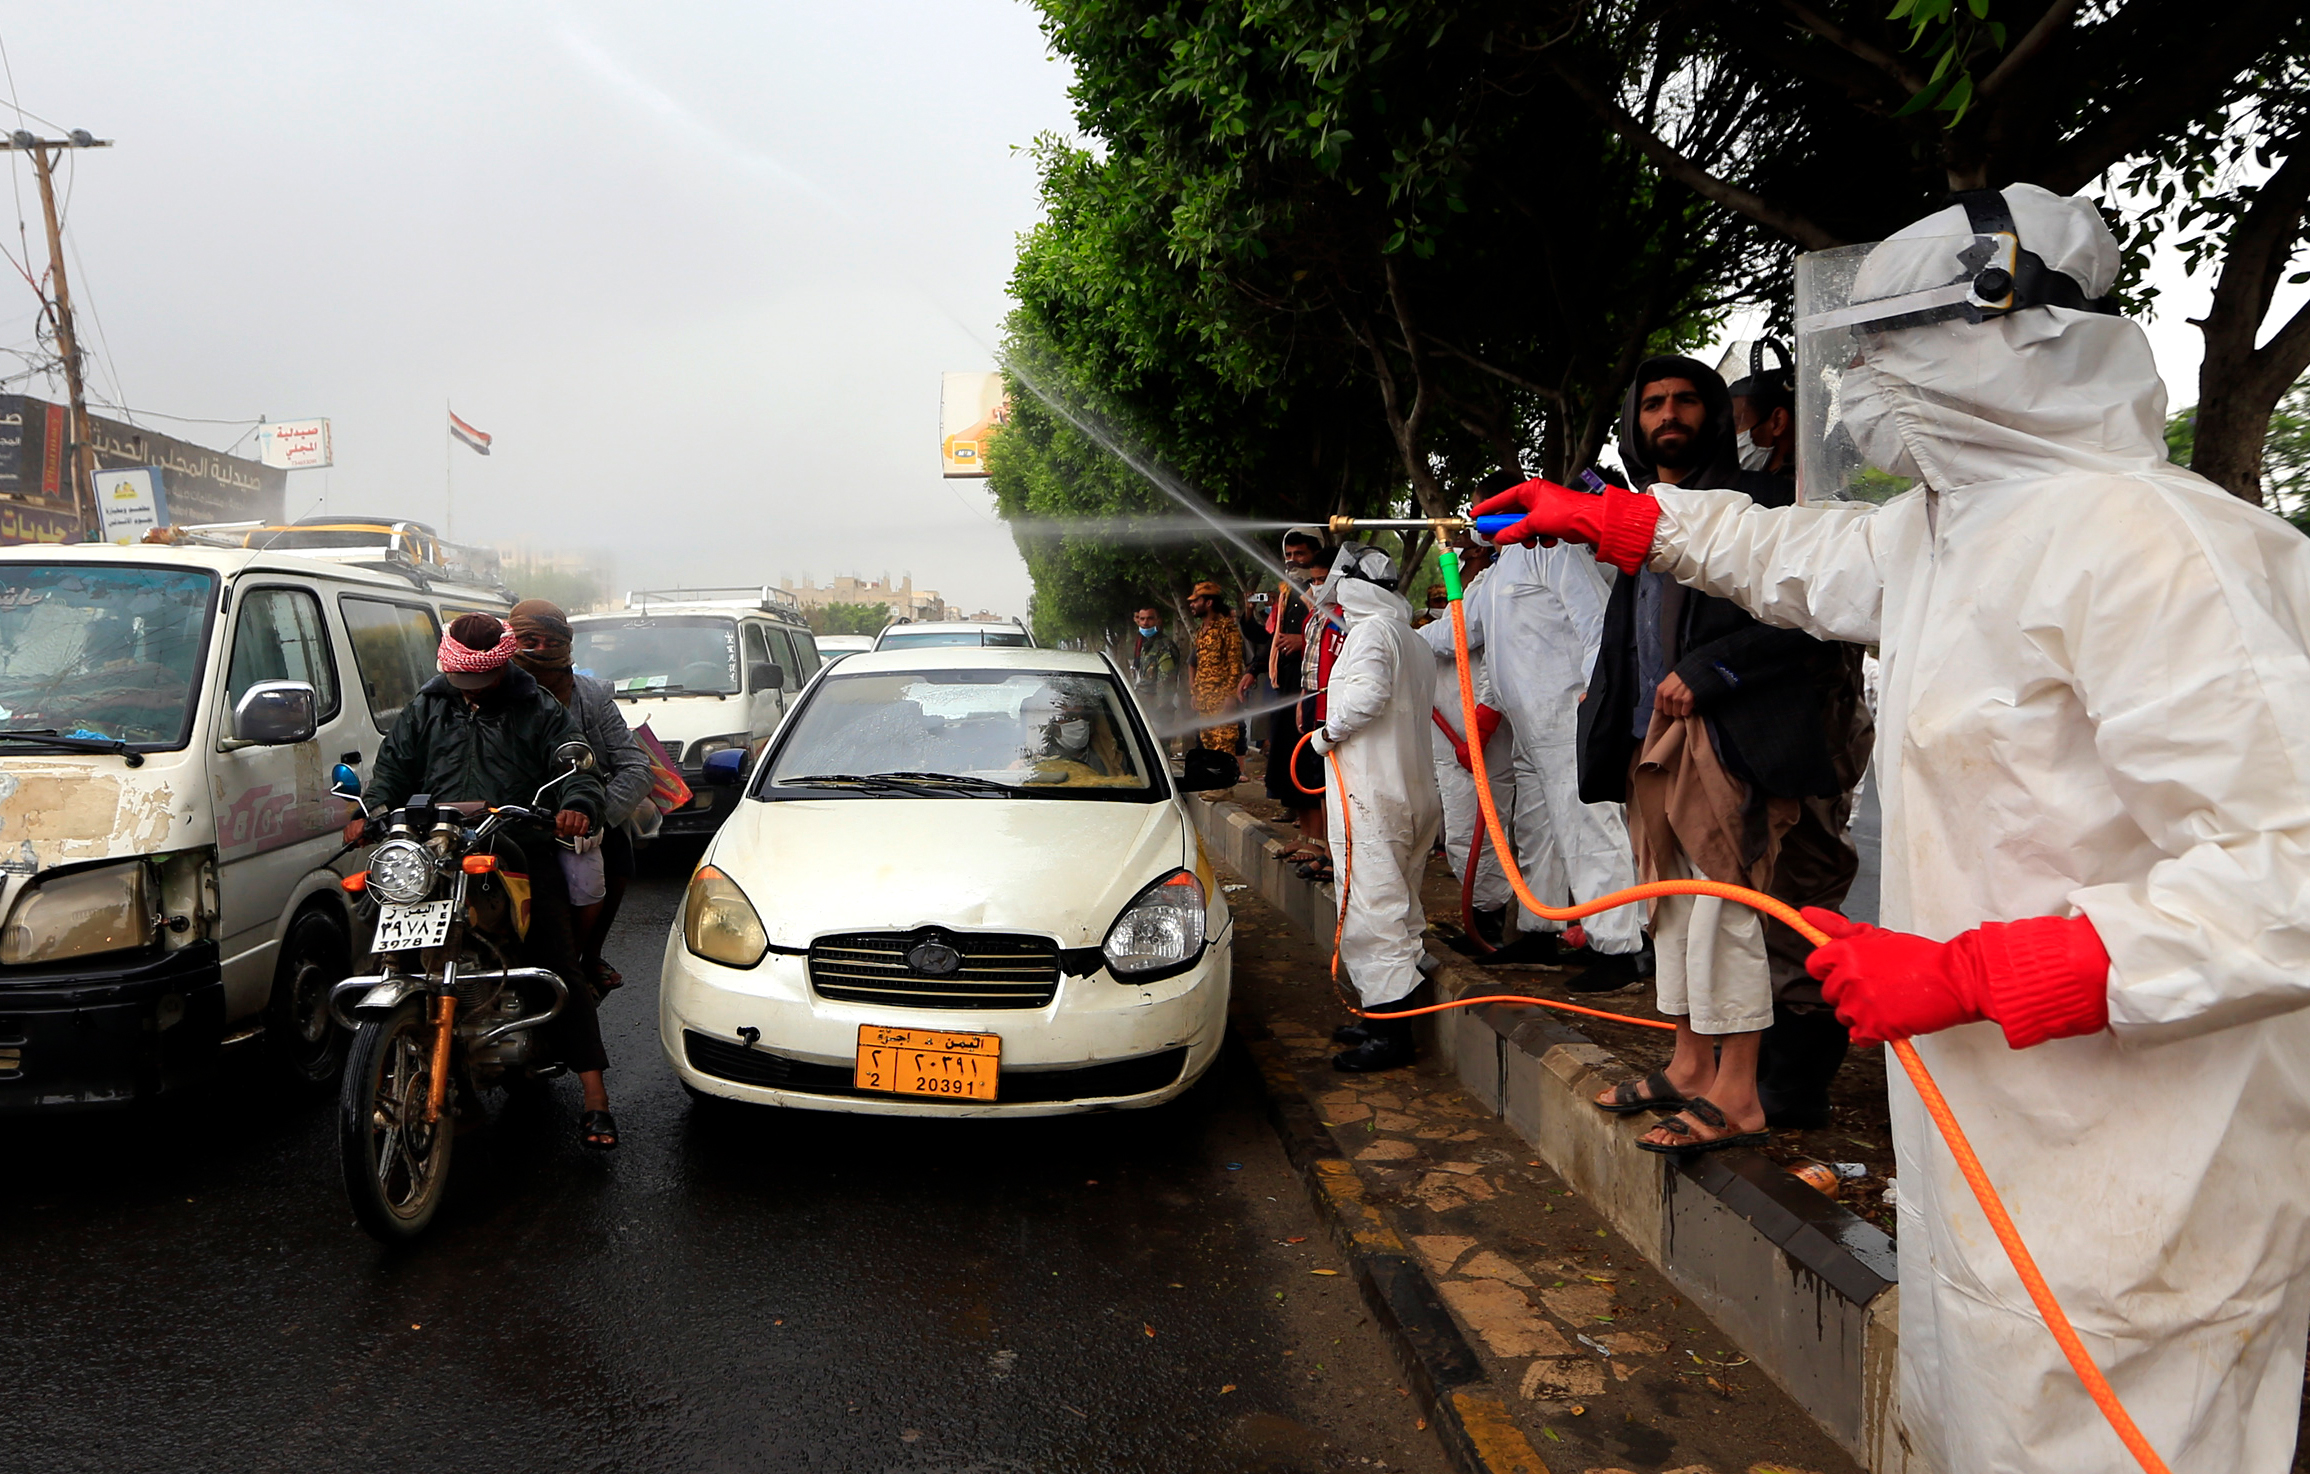 Yemeni workers wearing protective outfits spray disinfectant on passing cars and motorcycles in the capital Sanaa, during the ongoing novel coronavirus pandemic crisis, on May 21, 2020. (Mohammed Huwais—AFP/Getty Images)